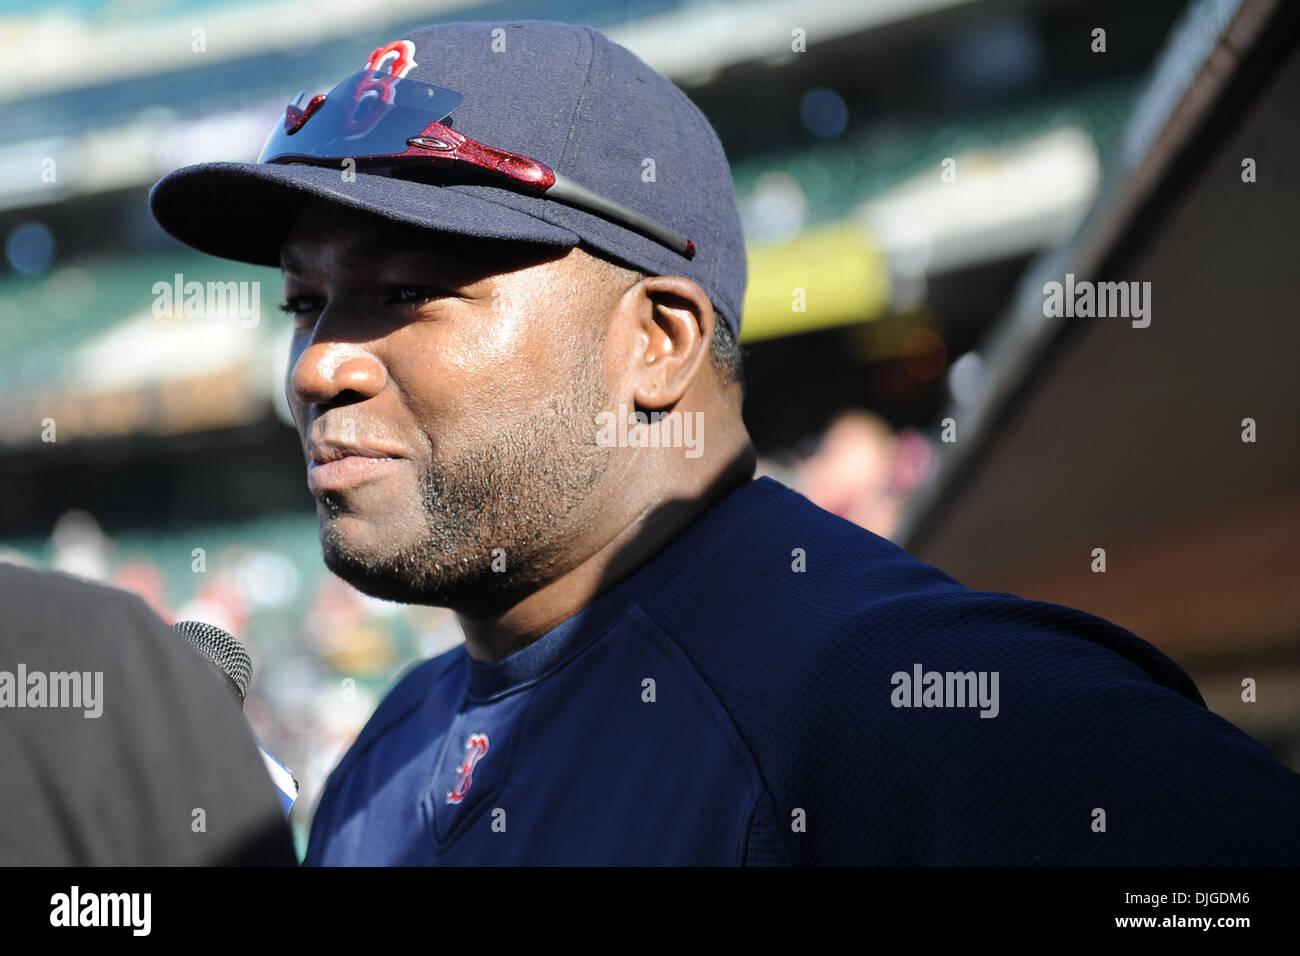 July 19, 2010 - Oakland, California, United States of America - 19 July 2010: Boston Red Sox DH David Ortiz (34) gives an interview to local TV before the MLB game between the Oakland Athletics and the Boston Red Sox at Oakland-Alameda County Coliseum in Oakland, CA.  The visiting Red Sox held on for a 2-1 win..Mandatory Credit: Matt Cohen / Southcreek Global (Credit Image: © South Stock Photo